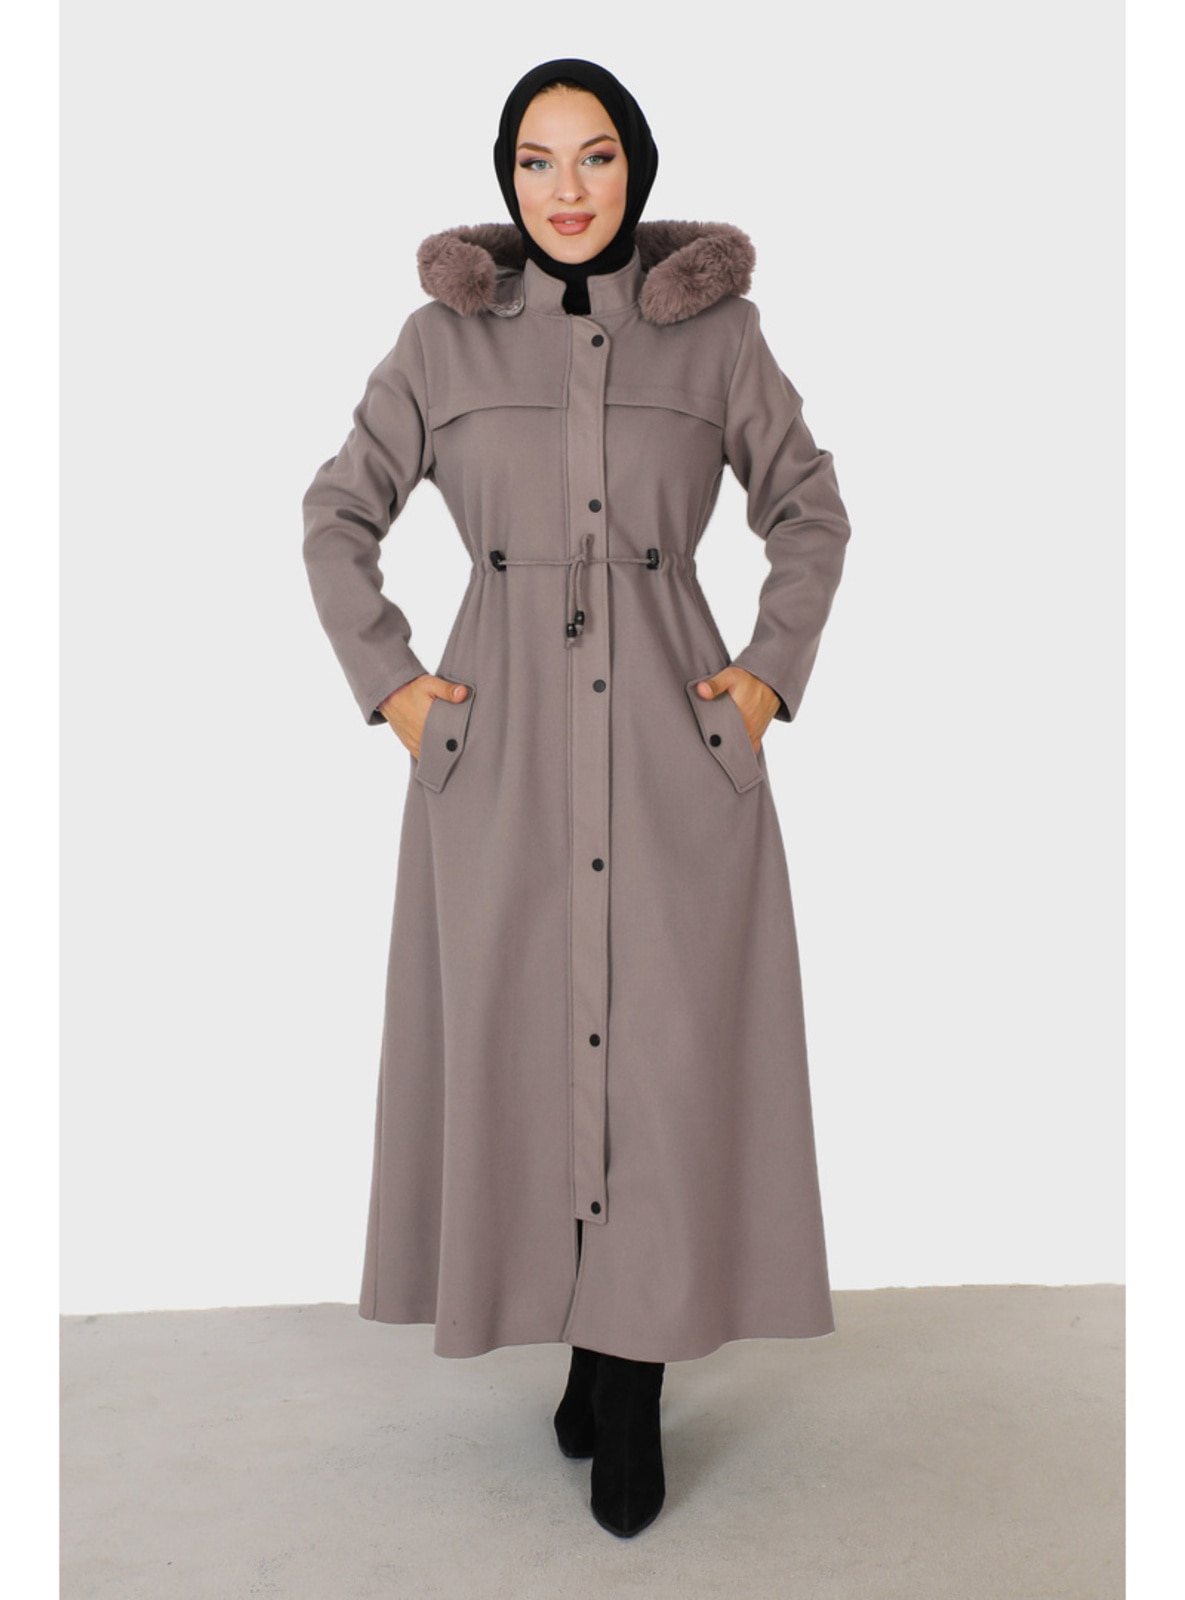 Mink - Fully Lined - Plus Size Coat